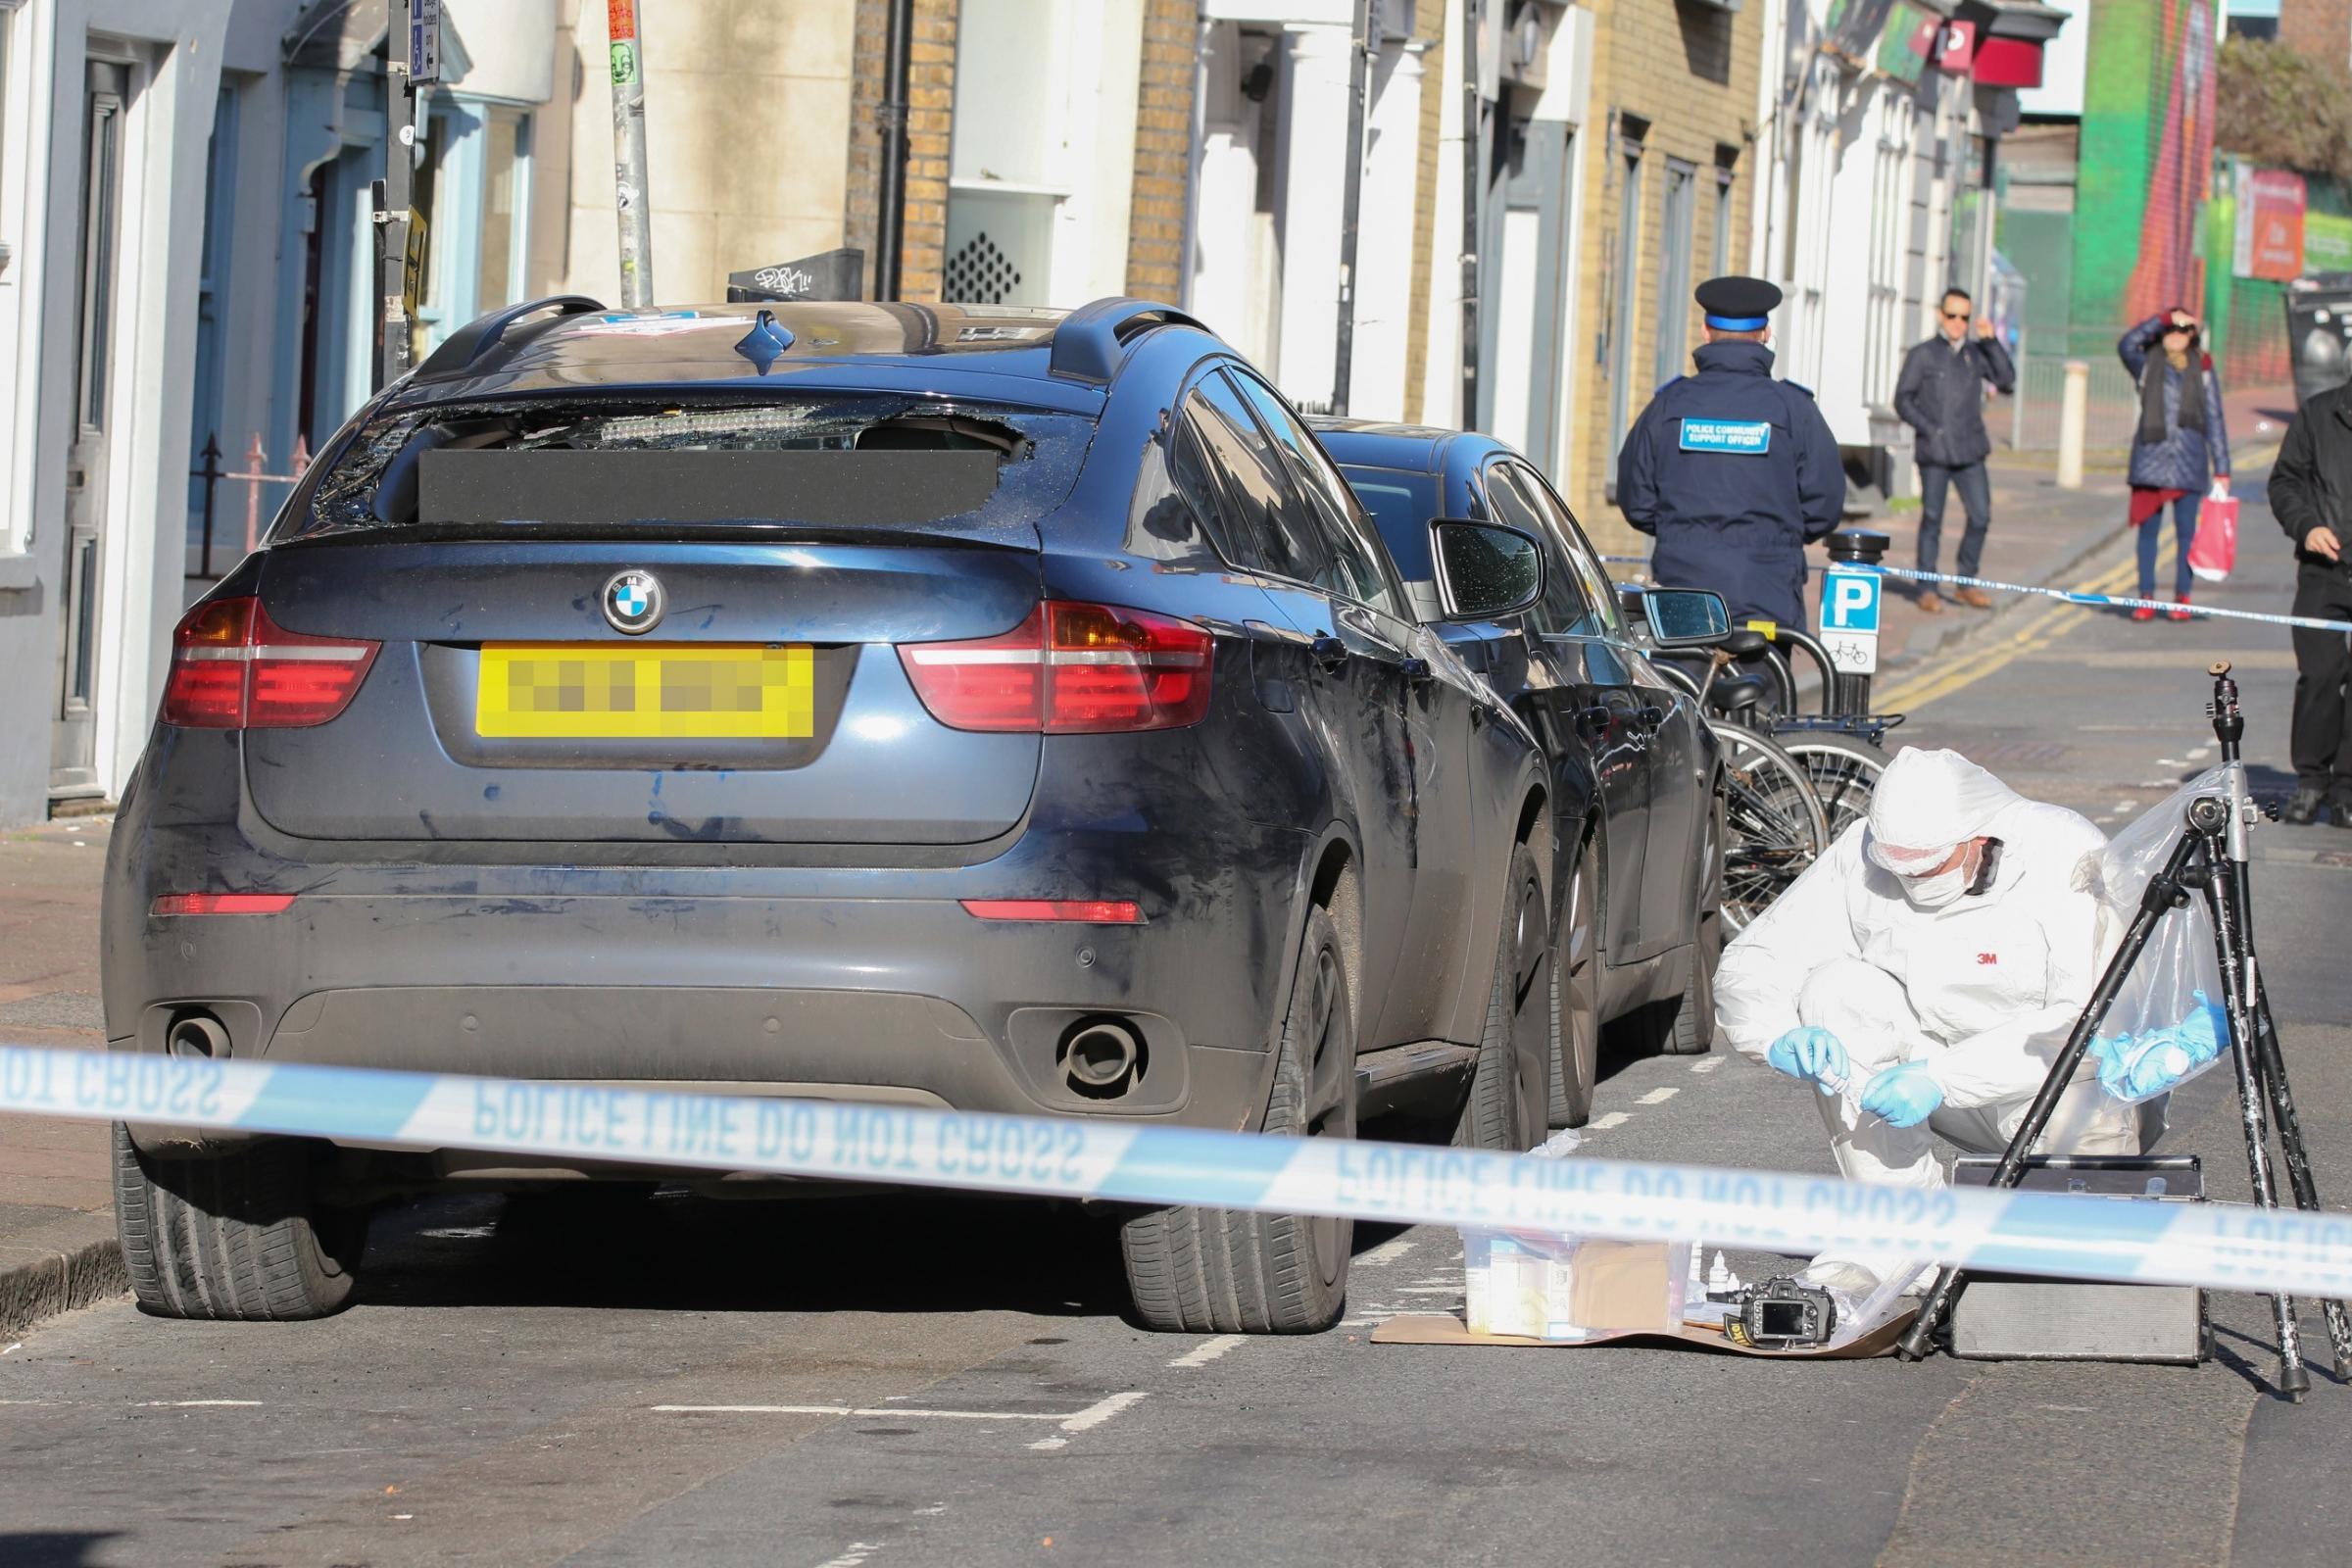 The vehicle driven by Iftekhar Khondaker that led to the death of Suel Delgado in Brighton. Khondaker denies driving at a group of men deliberately in order to kill them